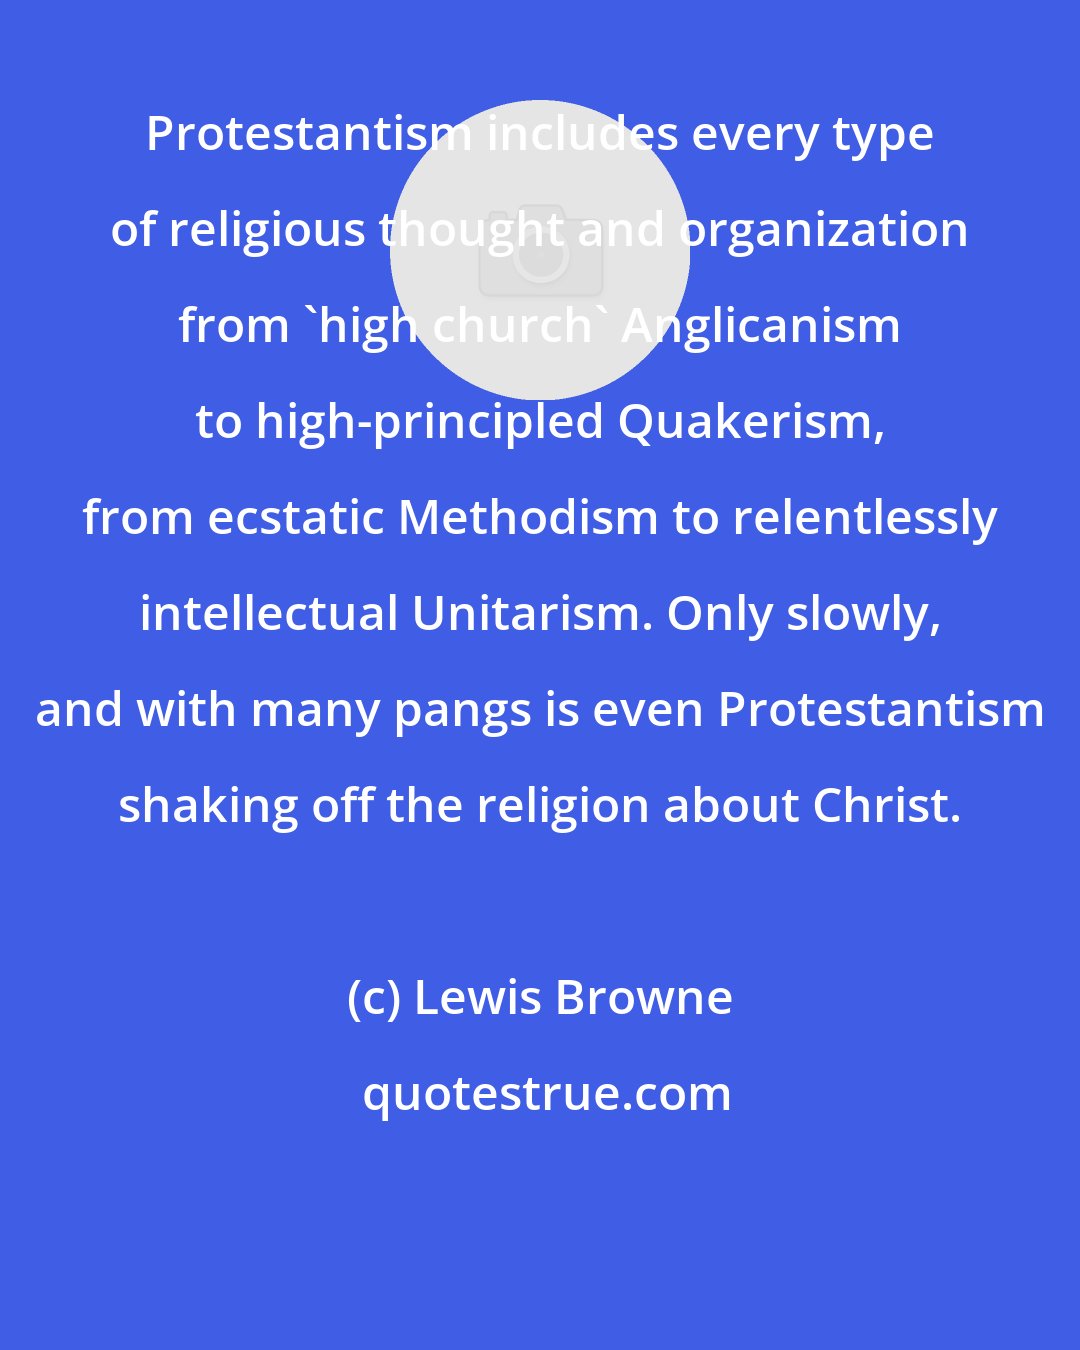 Lewis Browne: Protestantism includes every type of religious thought and organization from 'high church' Anglicanism to high-principled Quakerism, from ecstatic Methodism to relentlessly intellectual Unitarism. Only slowly, and with many pangs is even Protestantism shaking off the religion about Christ.